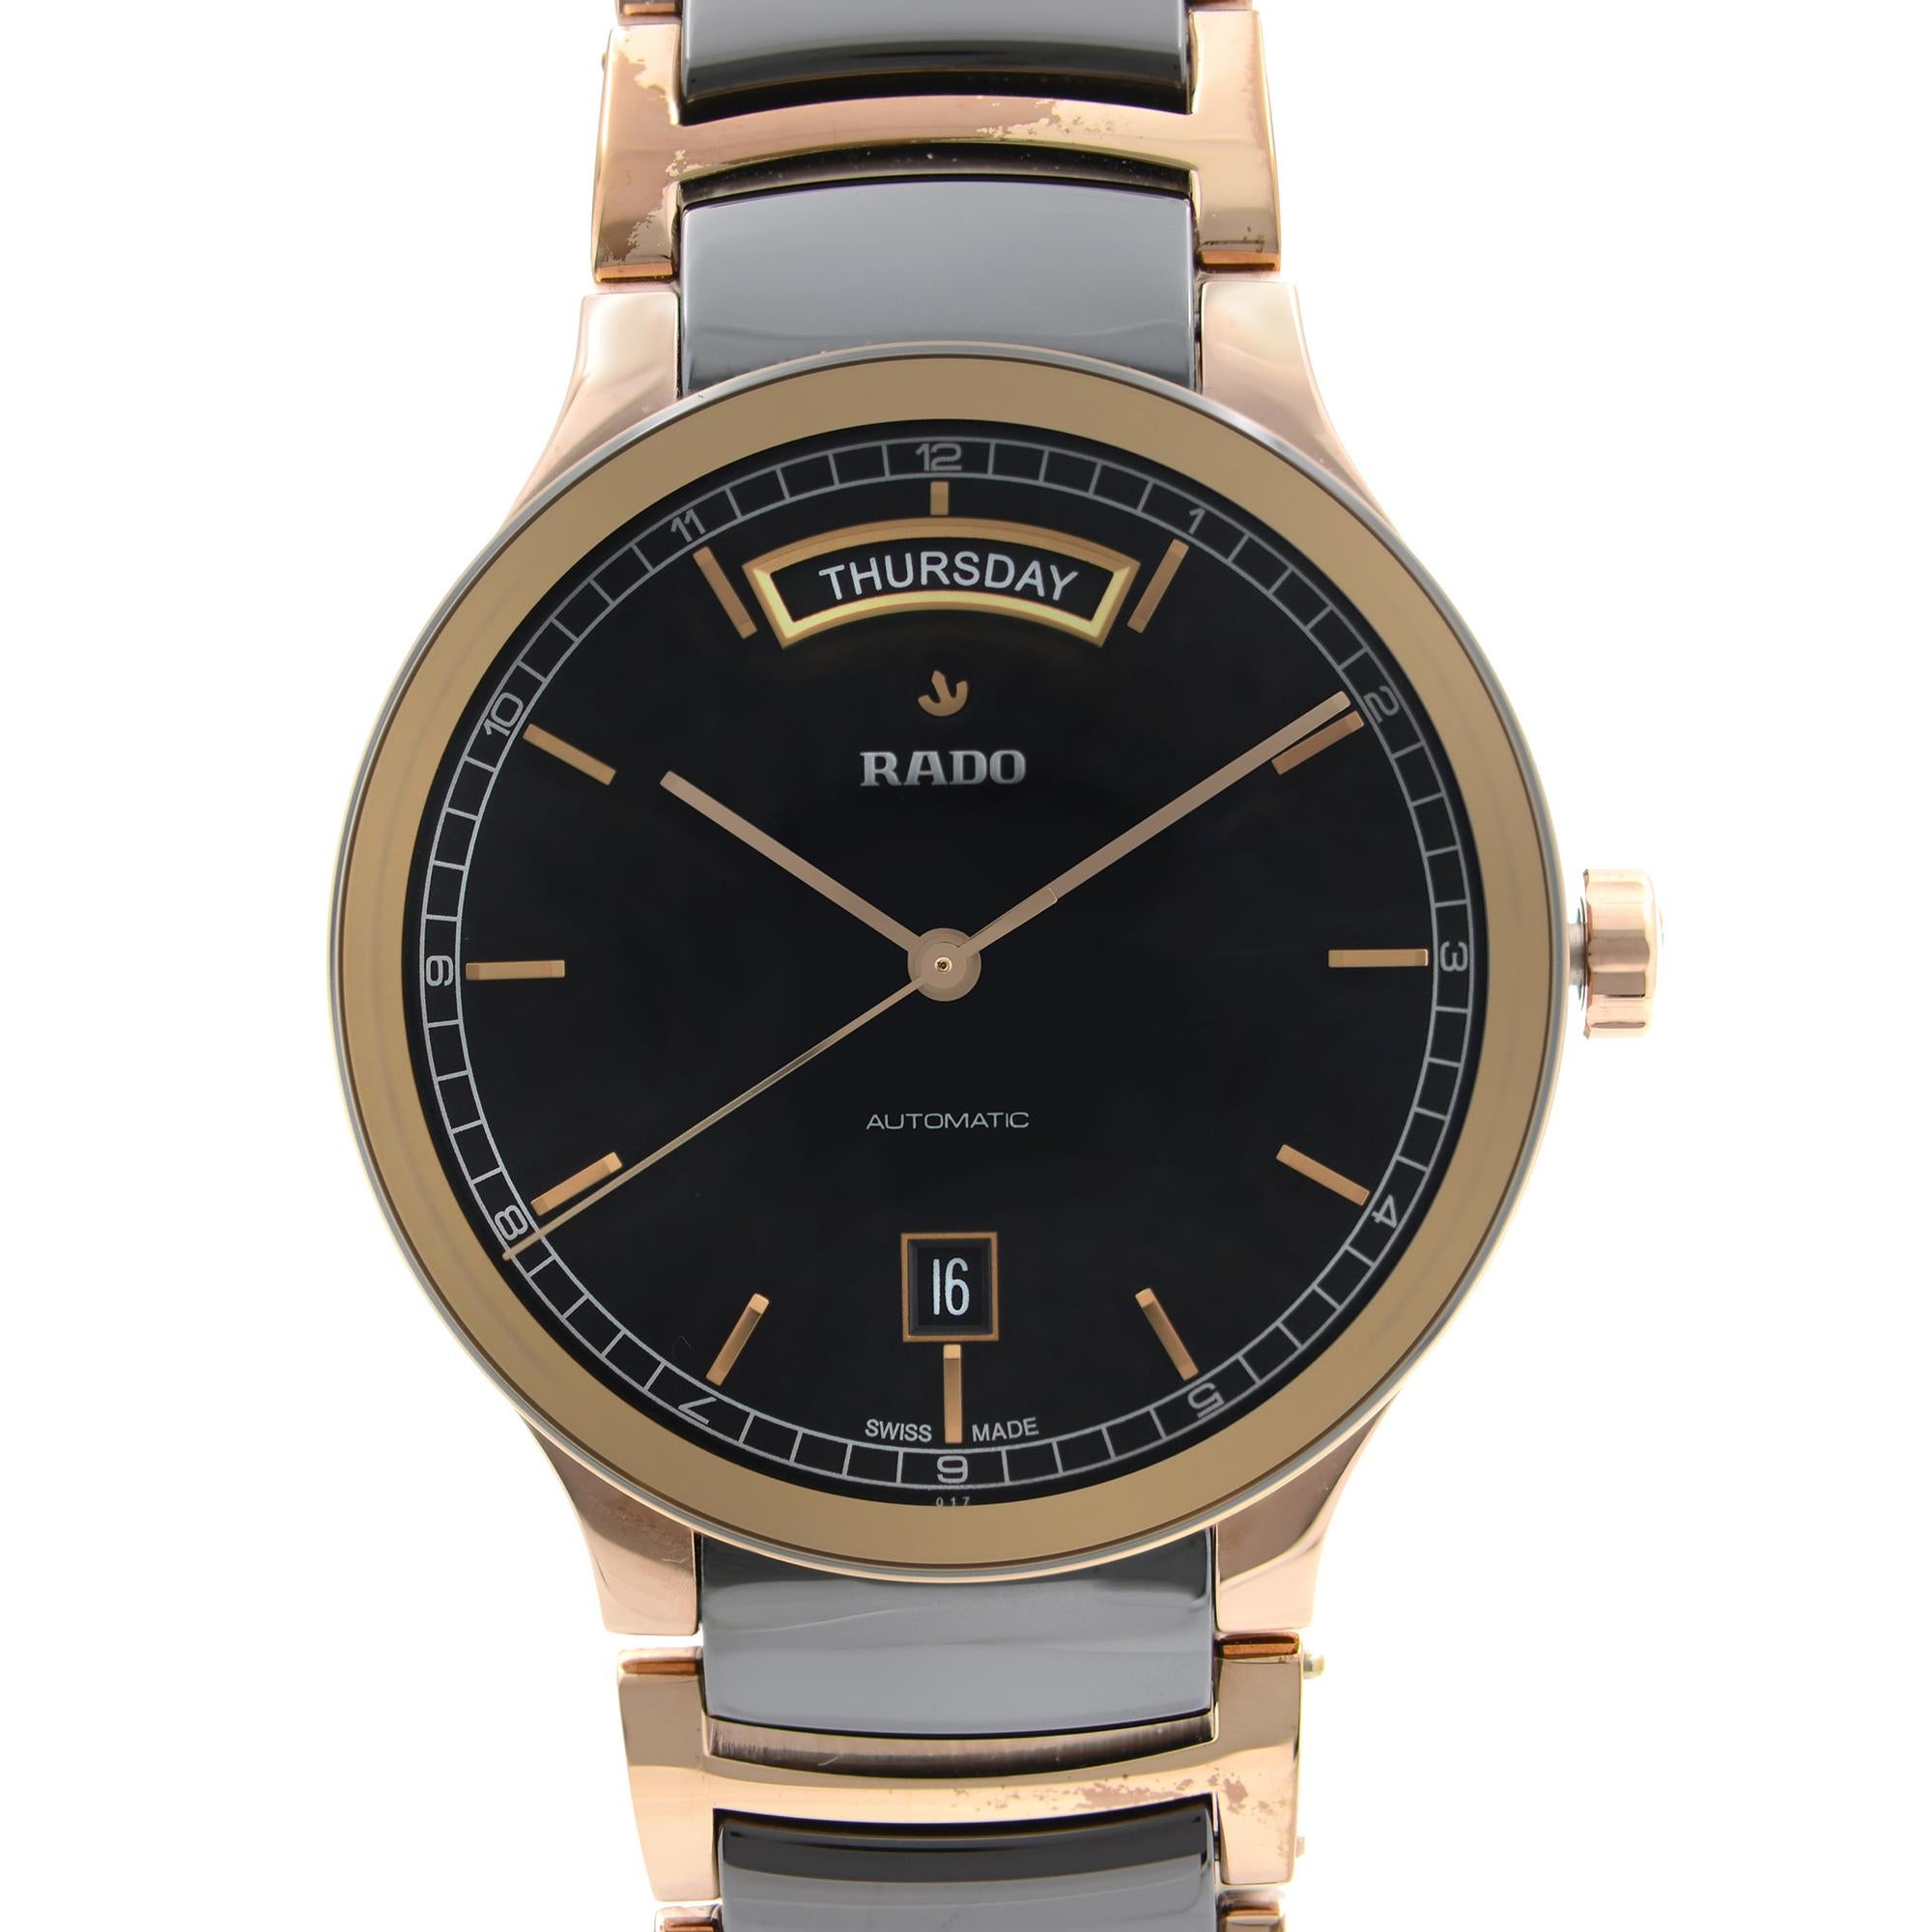 Pre-owned Rado Centrix Steel Ceramic Two-Tone Black Dial Automatic Men's Watch R30158172. The Watch Has Minor Scratches on the Case and Bracelet. This Beautiful Timepiece is Powered by Mechanical (Automatic) Movement and Features: Round Rose Gold